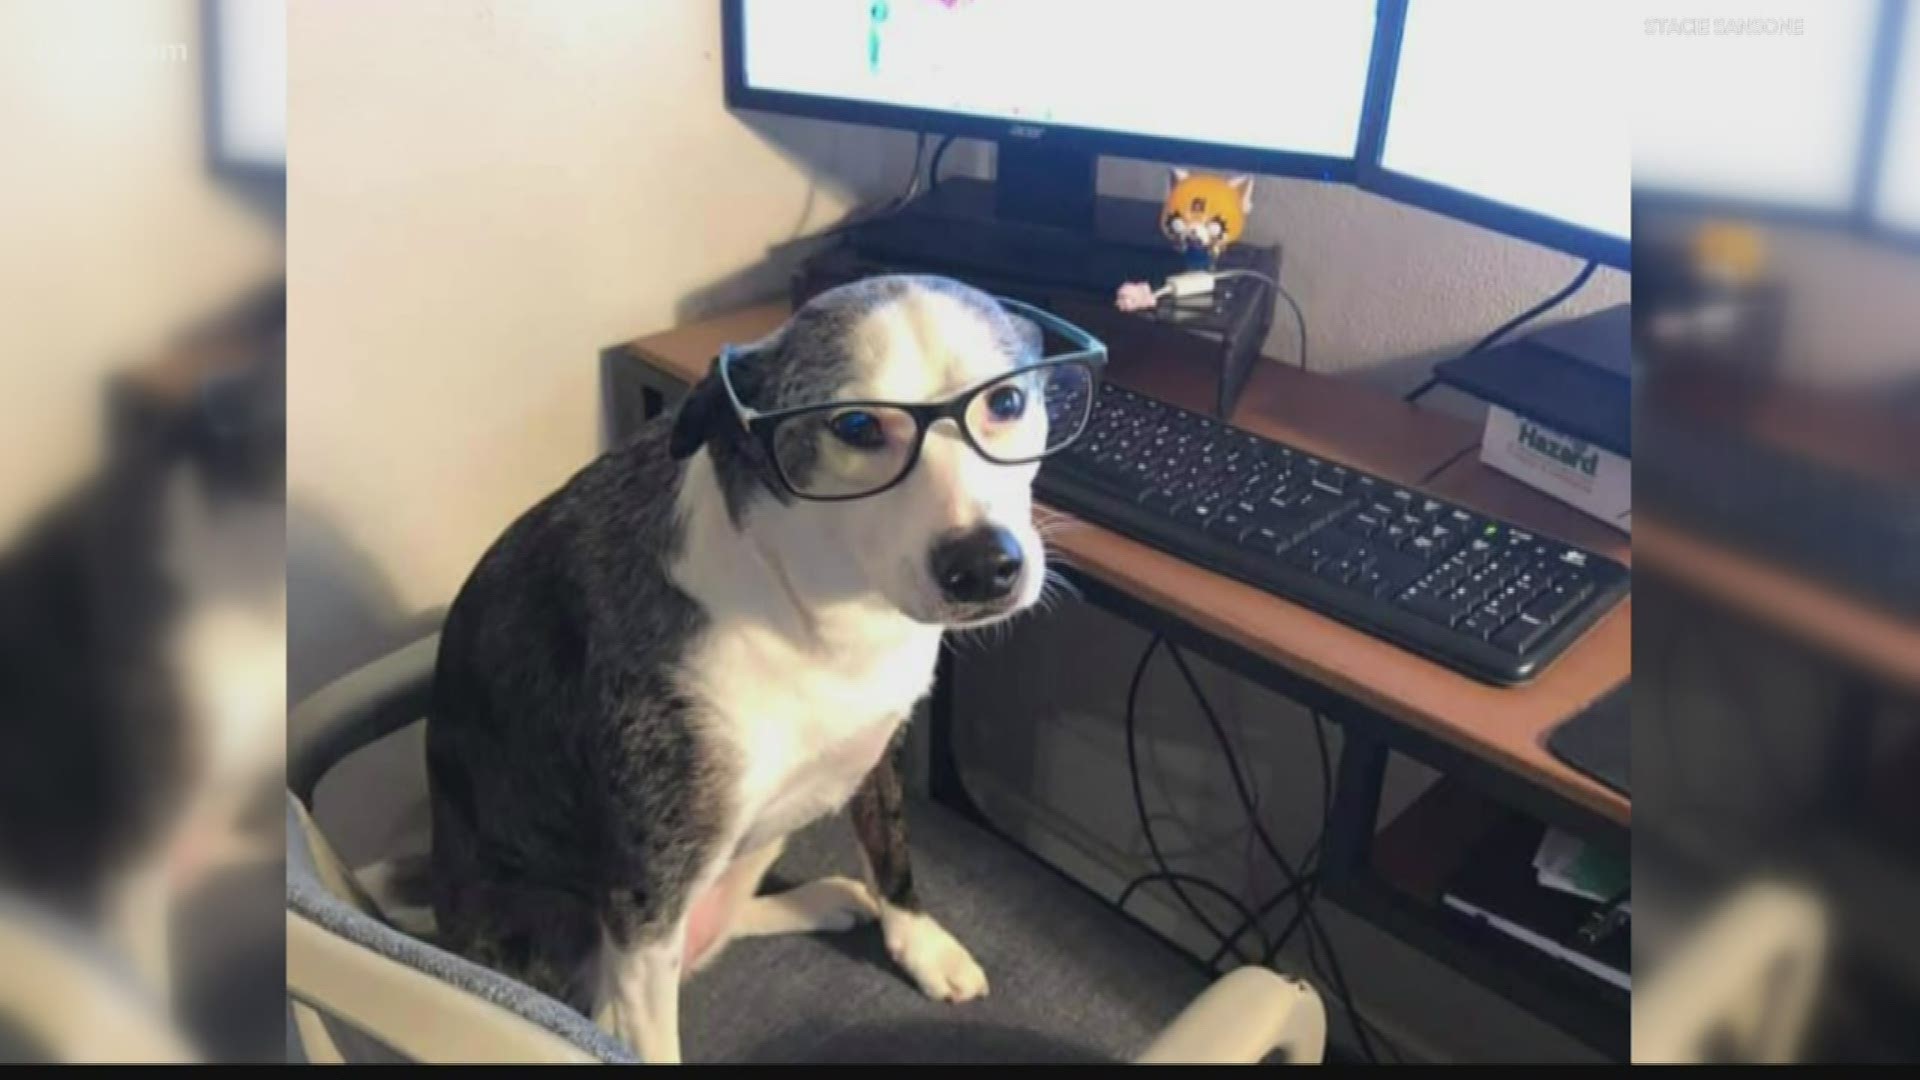 People from the St. Louis area have been sharing photos of their pets while they work from home.